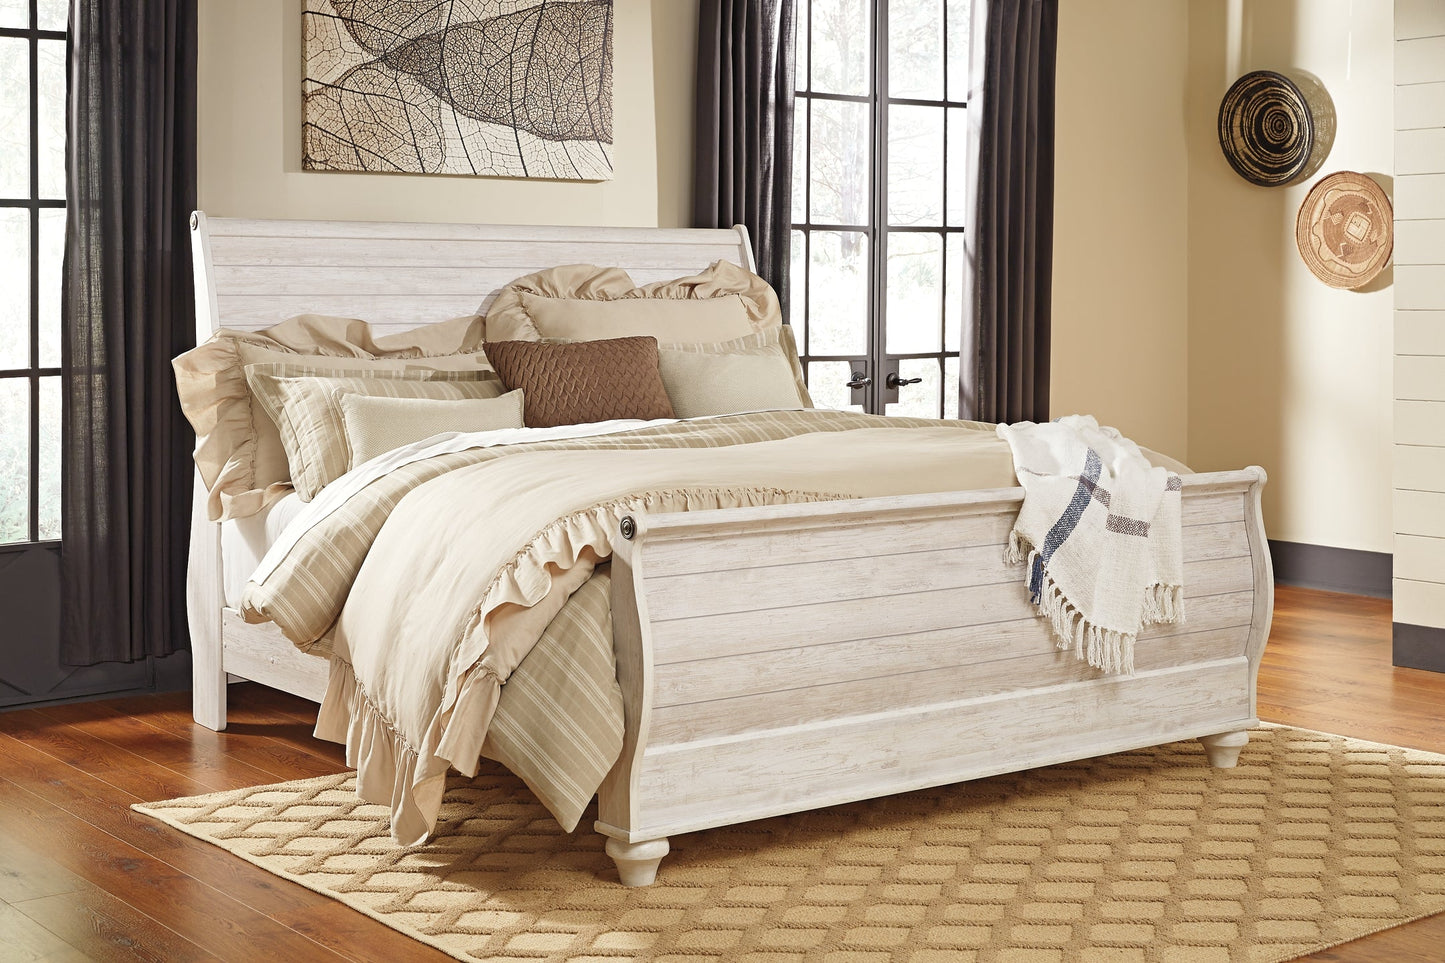 Willowton Queen Sleigh Bed at Cloud 9 Mattress & Furniture furniture, home furnishing, home decor